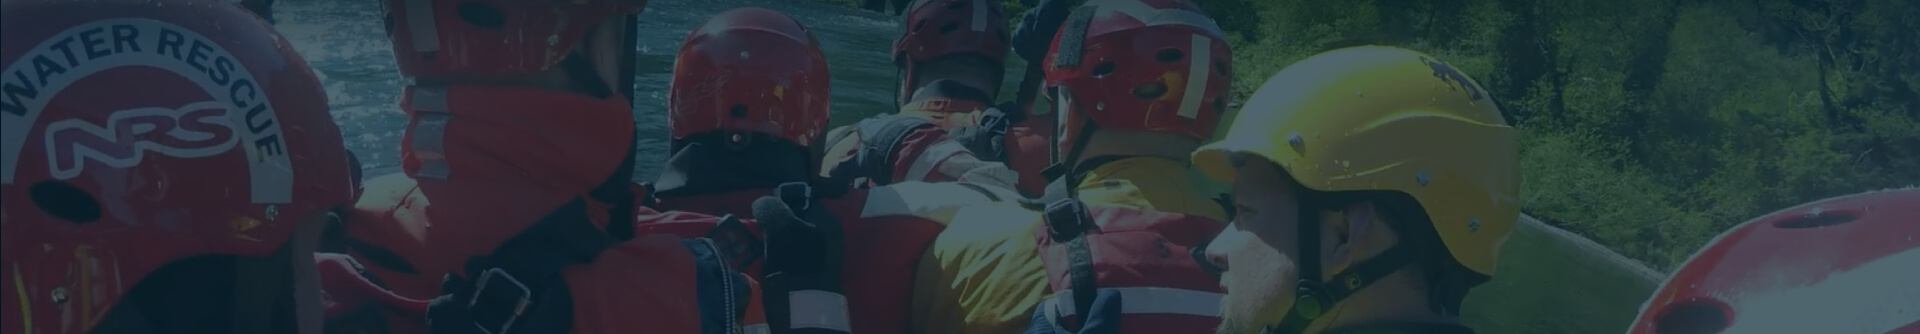 Image presents a picture of swiftwater training to present promotion to Swiftwater Rescue instructors in Oregon or Washington, to notify them that they can register for Crux Rescue's Swiftwater Rescue Instructor Courses in Train The Trainer specialization.